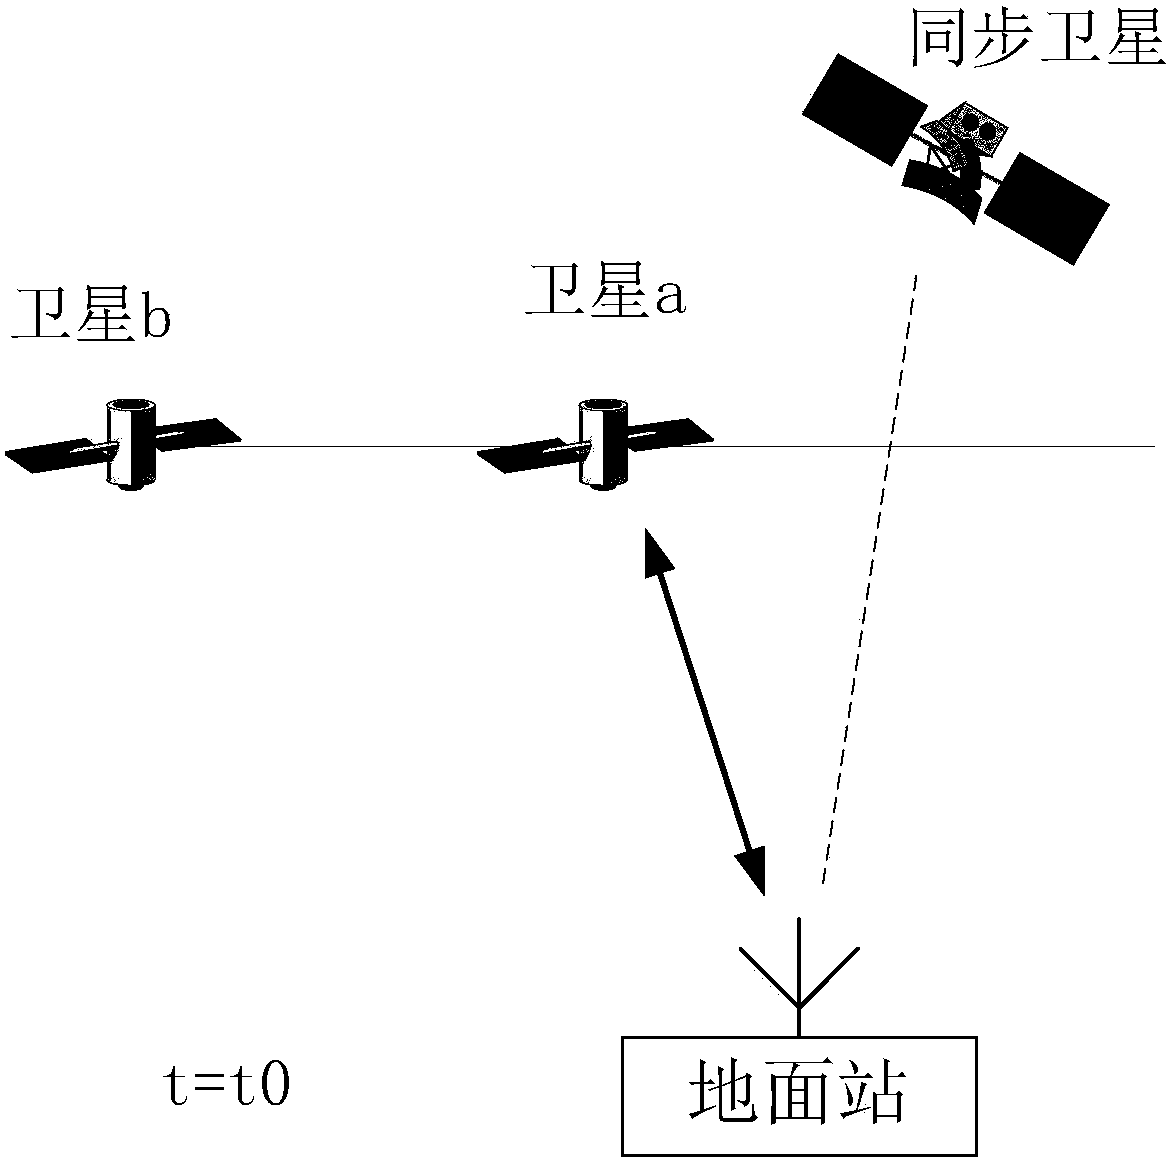 Ground station system and method for avoiding collinear interference with geostationary satellites